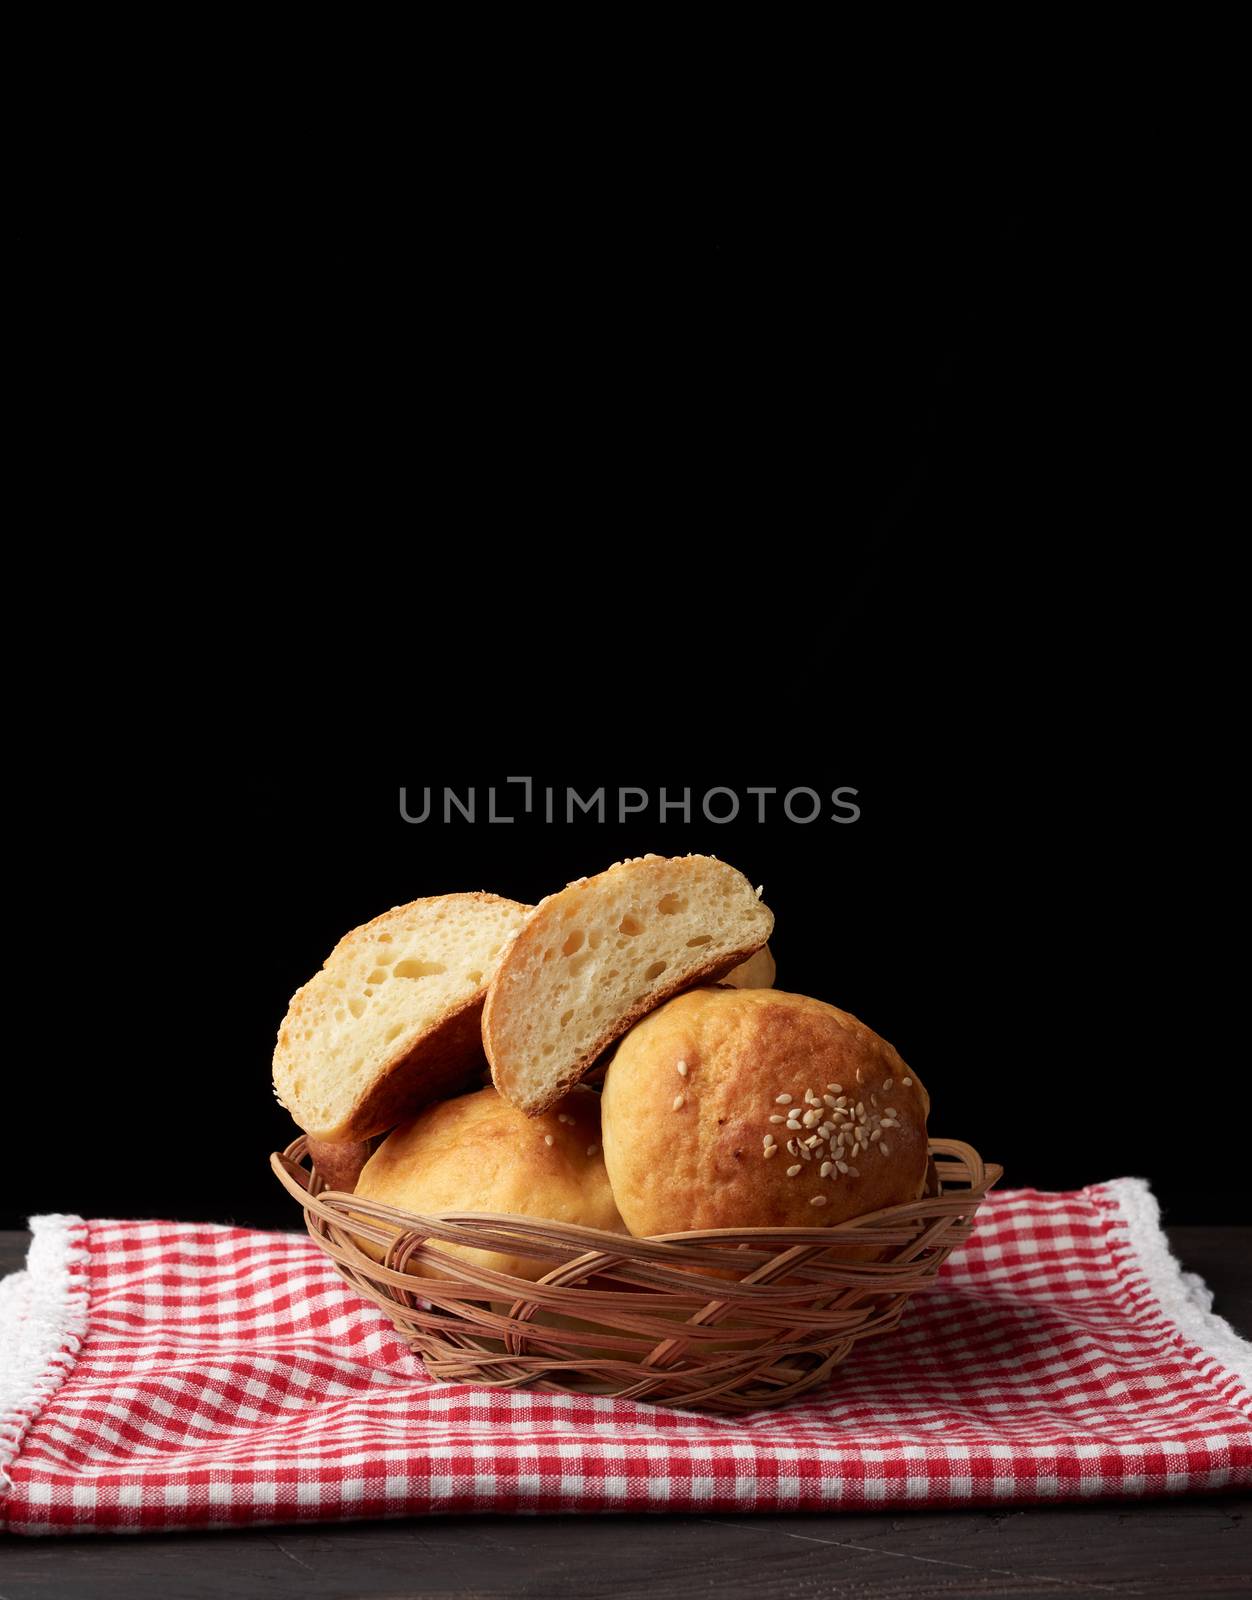 baked round bun with sesame seeds, black background, home baking, copy space